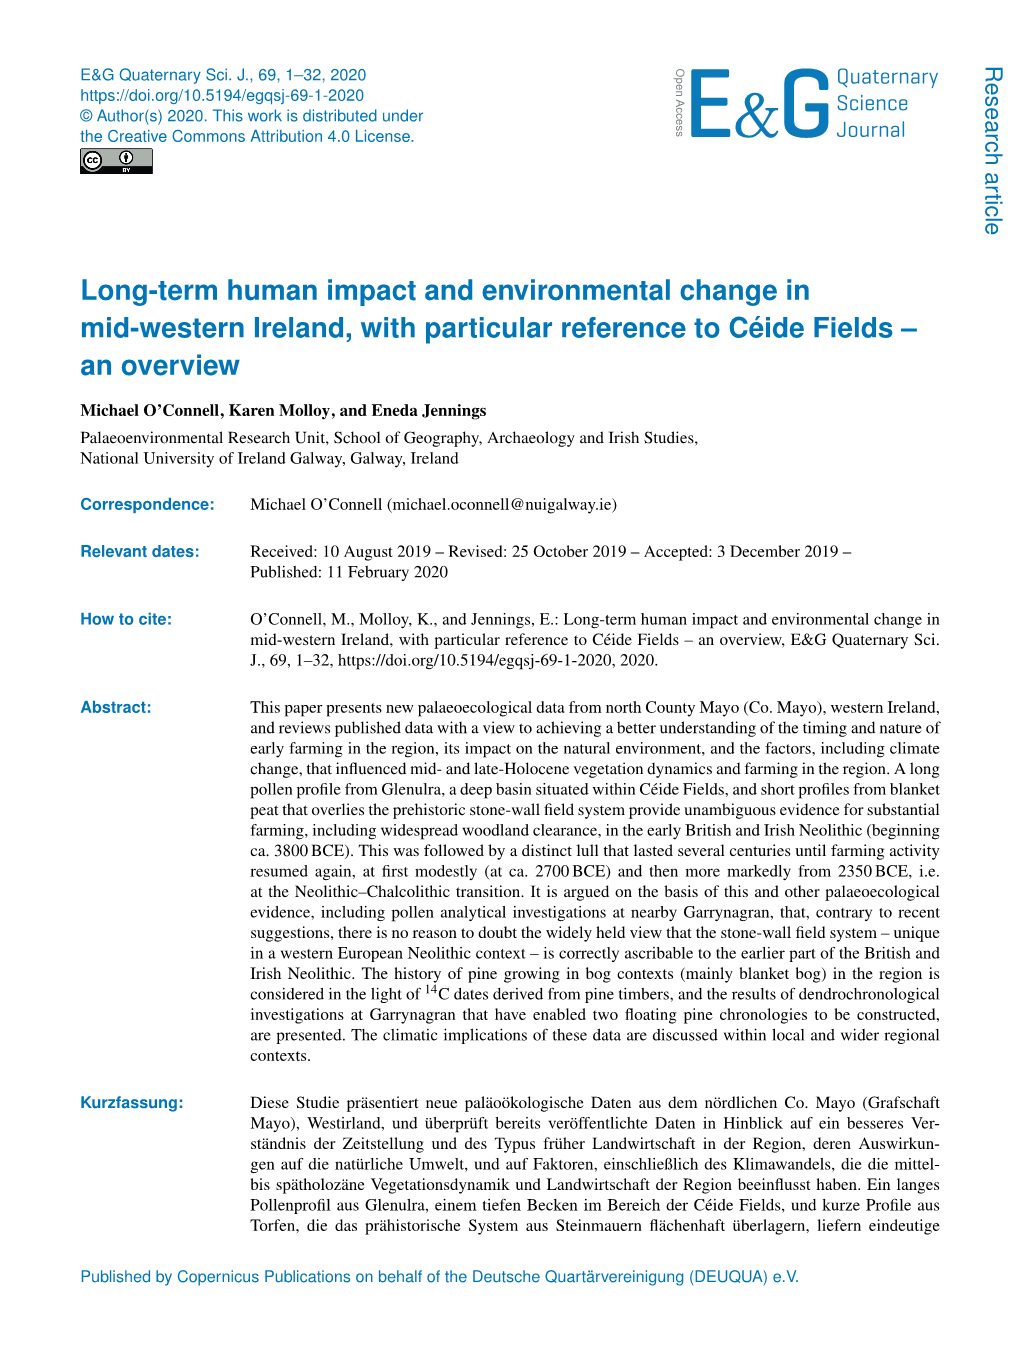 Long-Term Human Impact and Environmental Change in Mid-Western Ireland, with Particular Reference to Céide Fields – an Overview